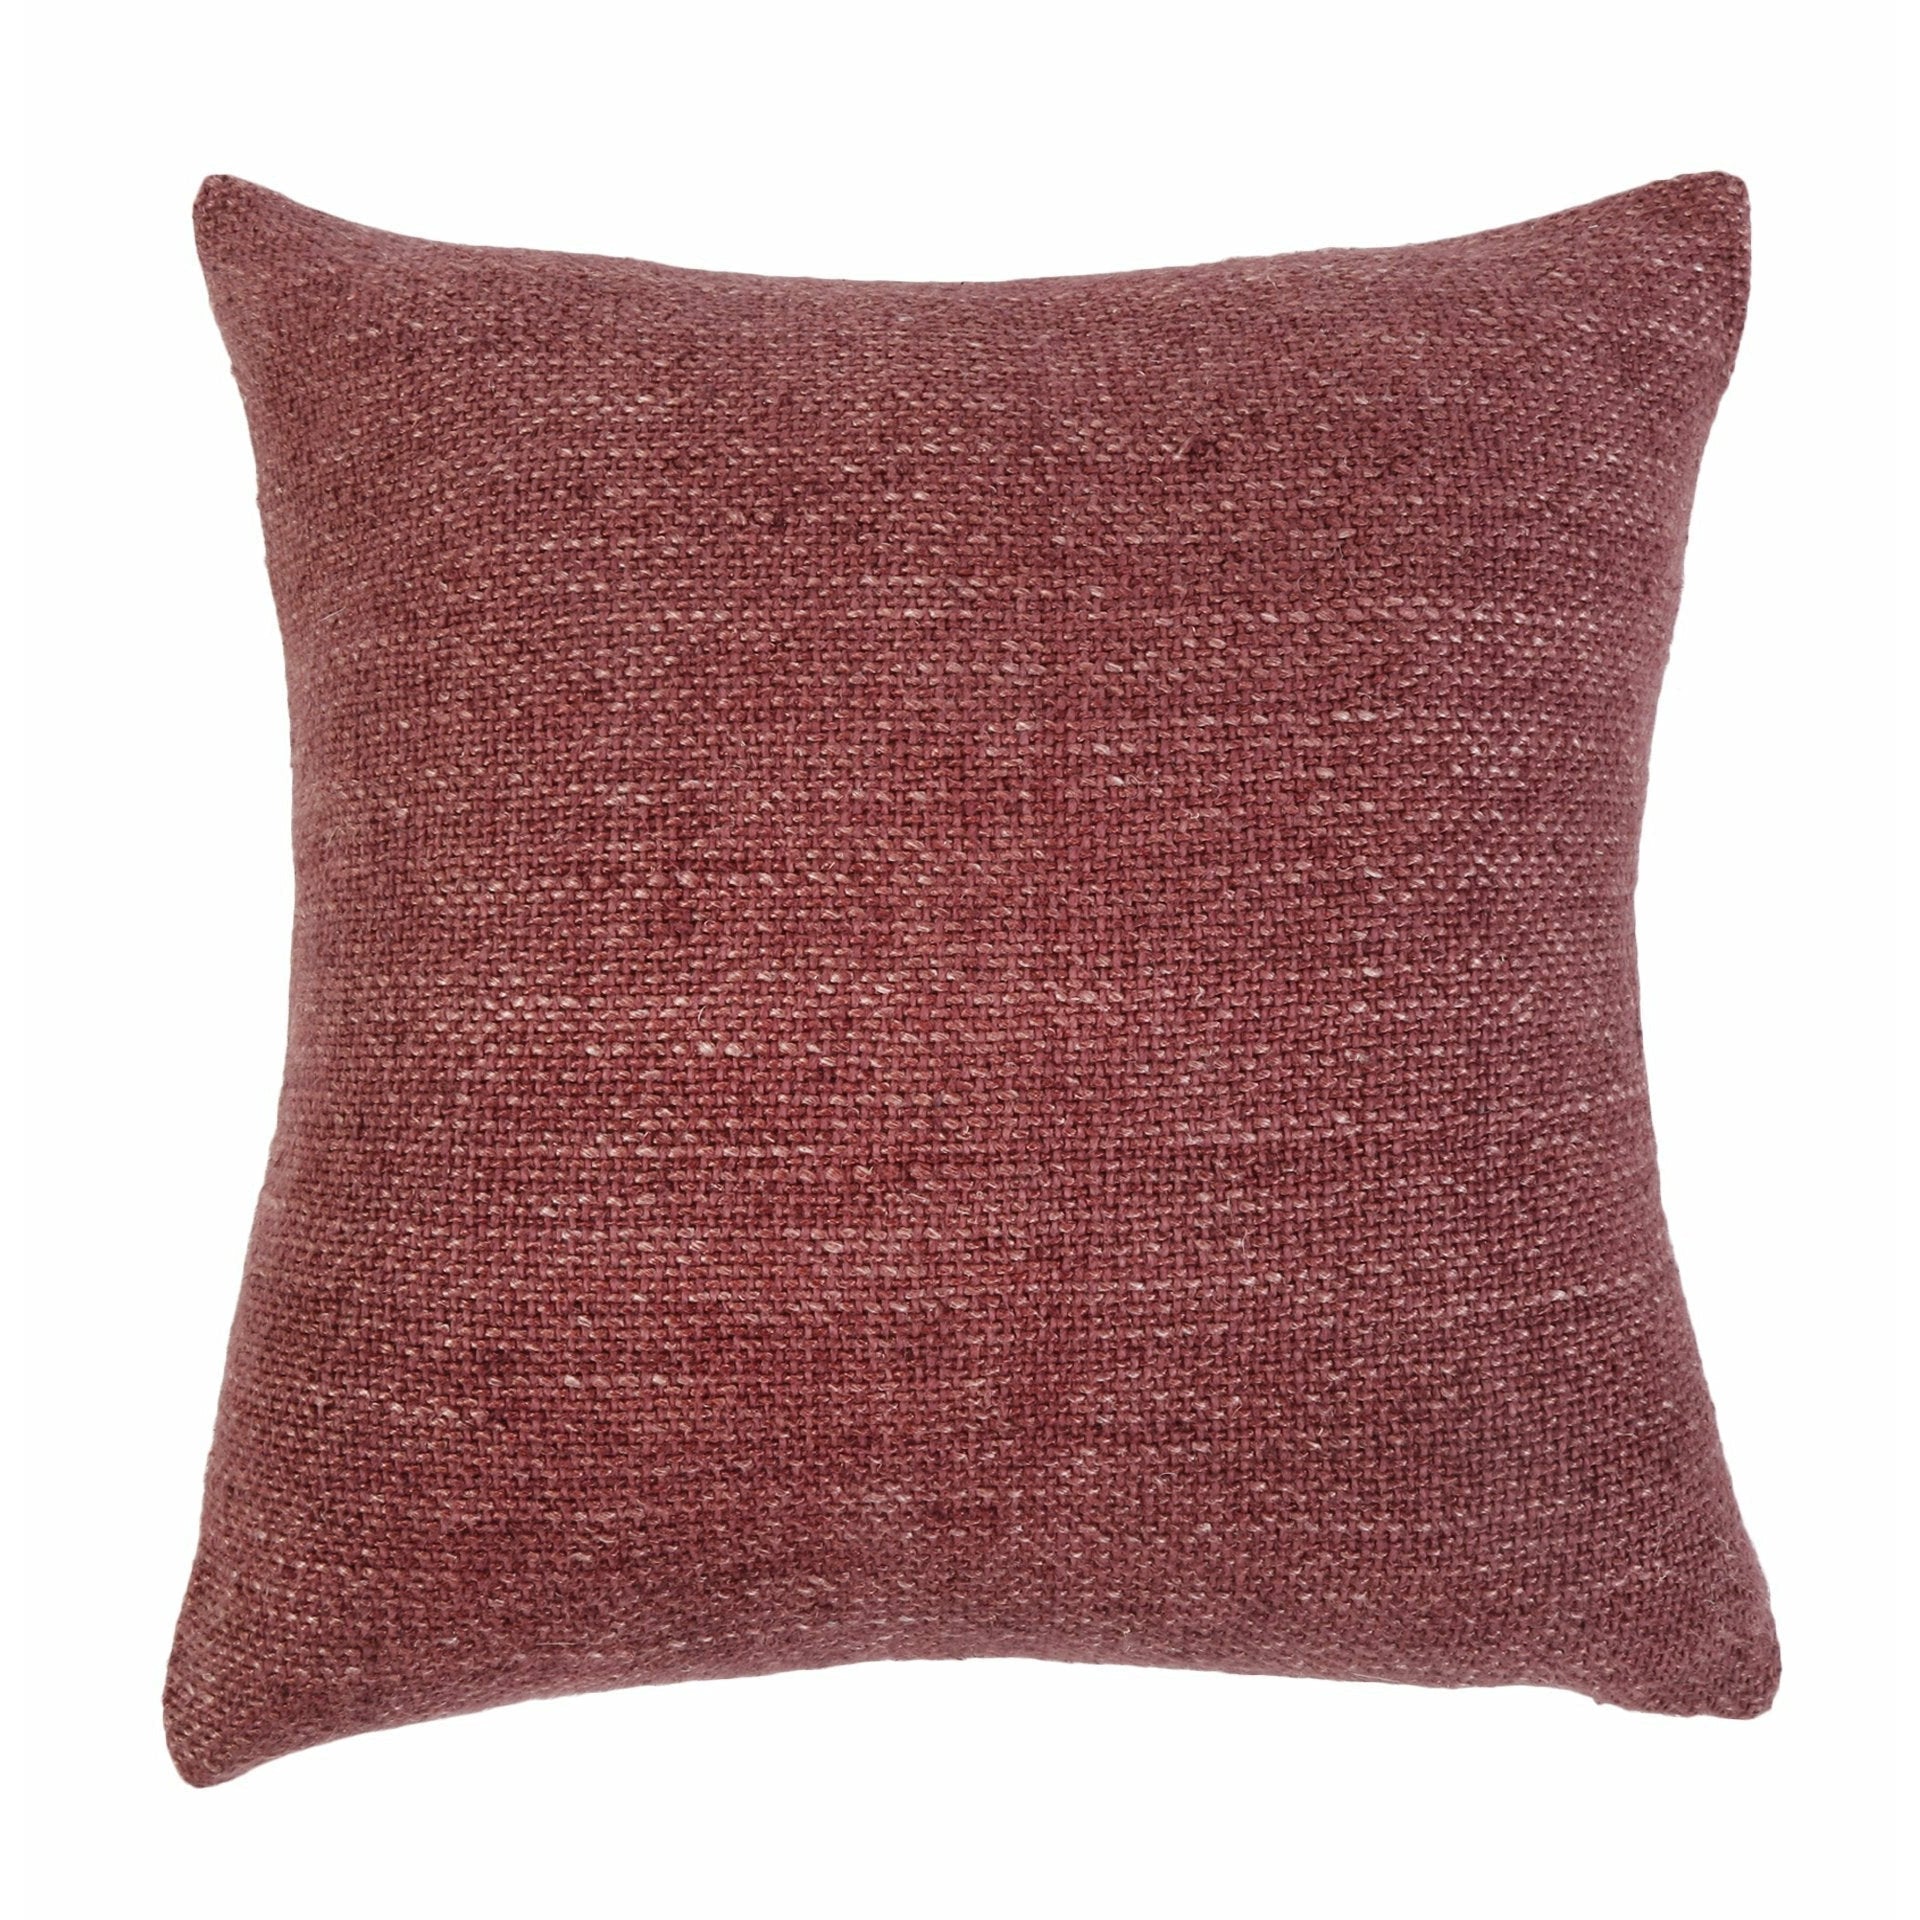 Hendrick 20x20 Pillow by Pom at Home